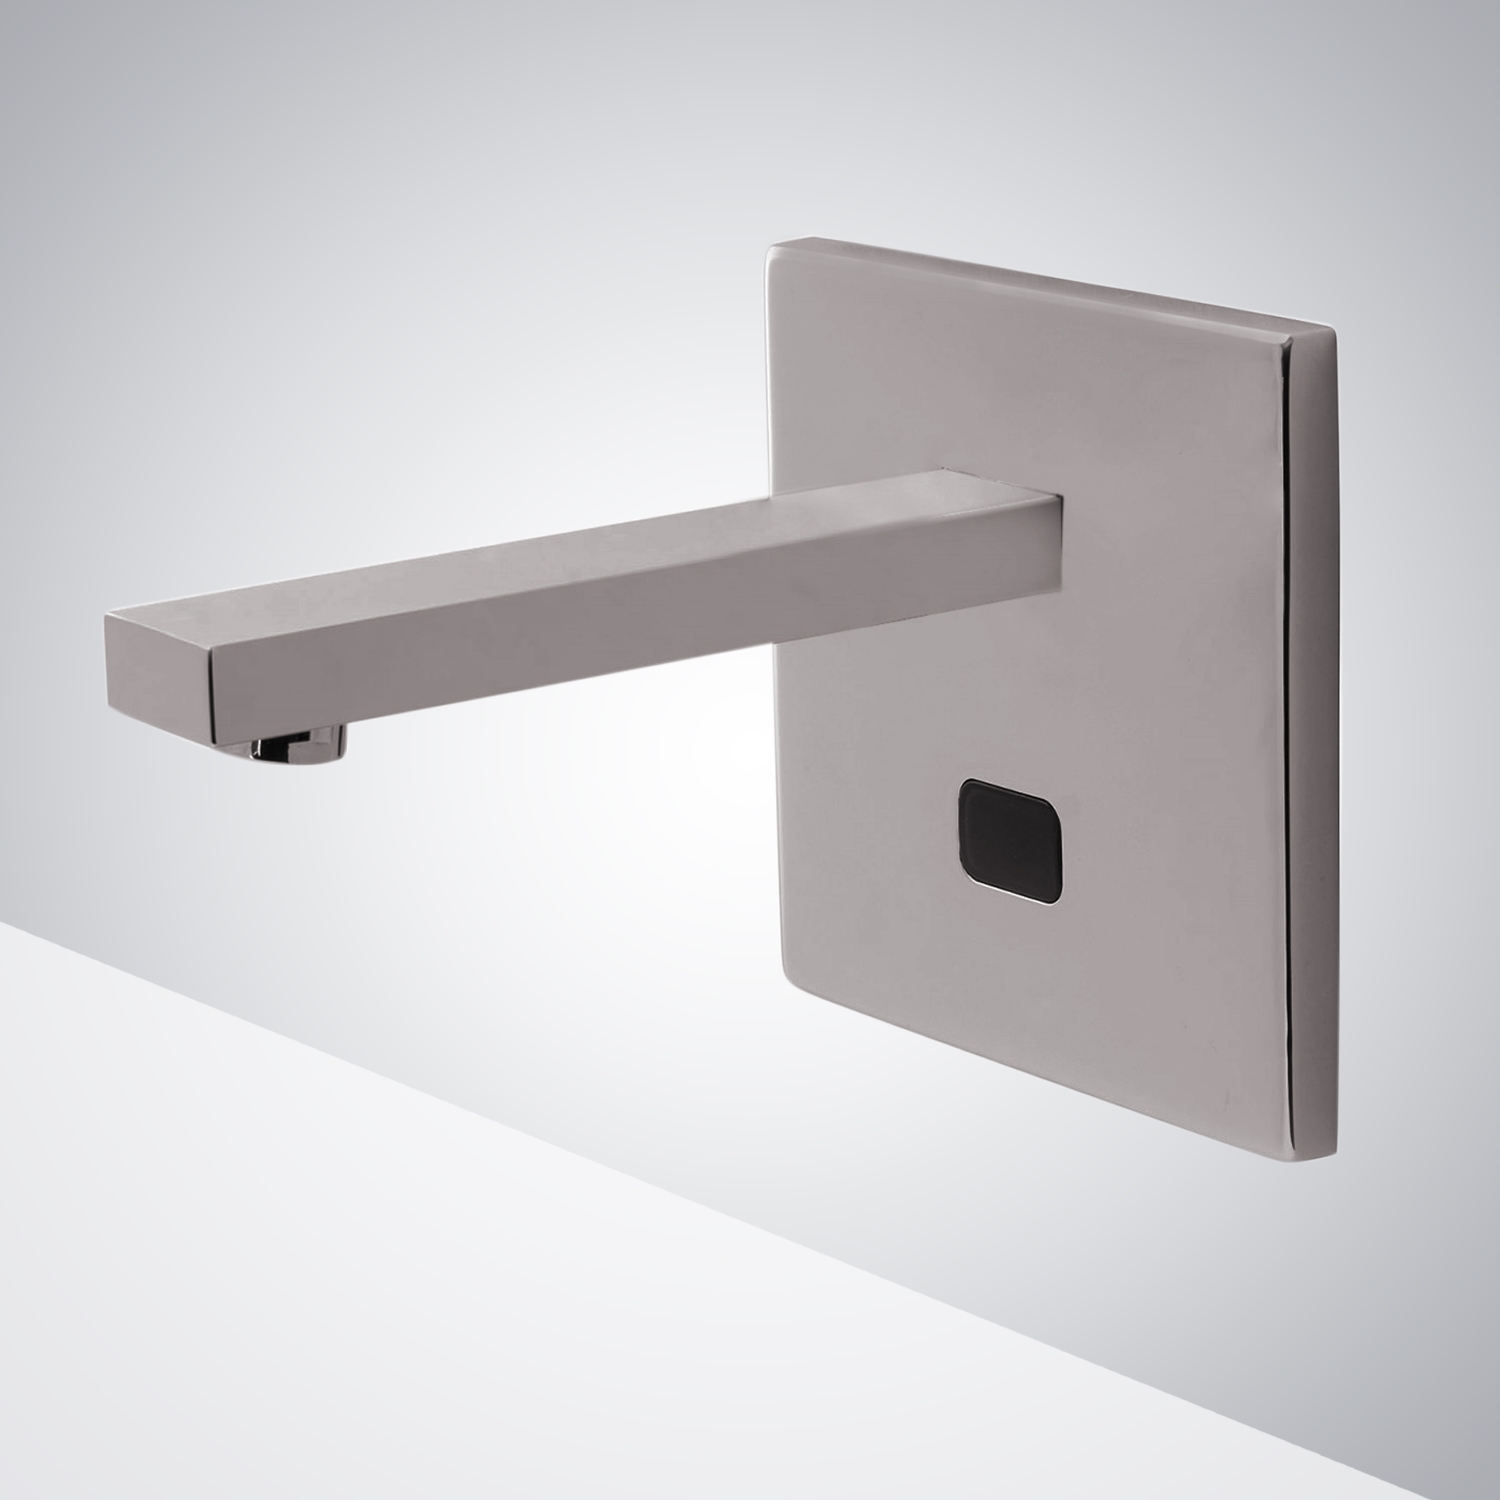 Fontana Commercial Brushed Nickel Wall Mounted XT5 Touchless Bathroom Faucet